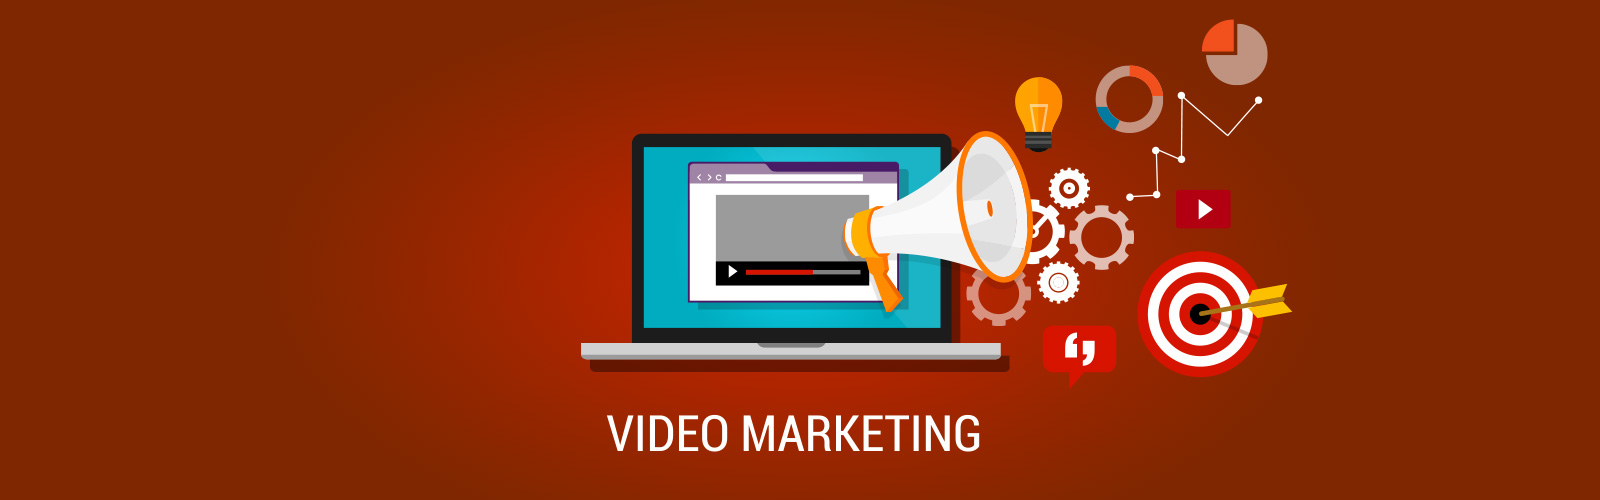 Are You Cashing In on the Value of Video Marketing?